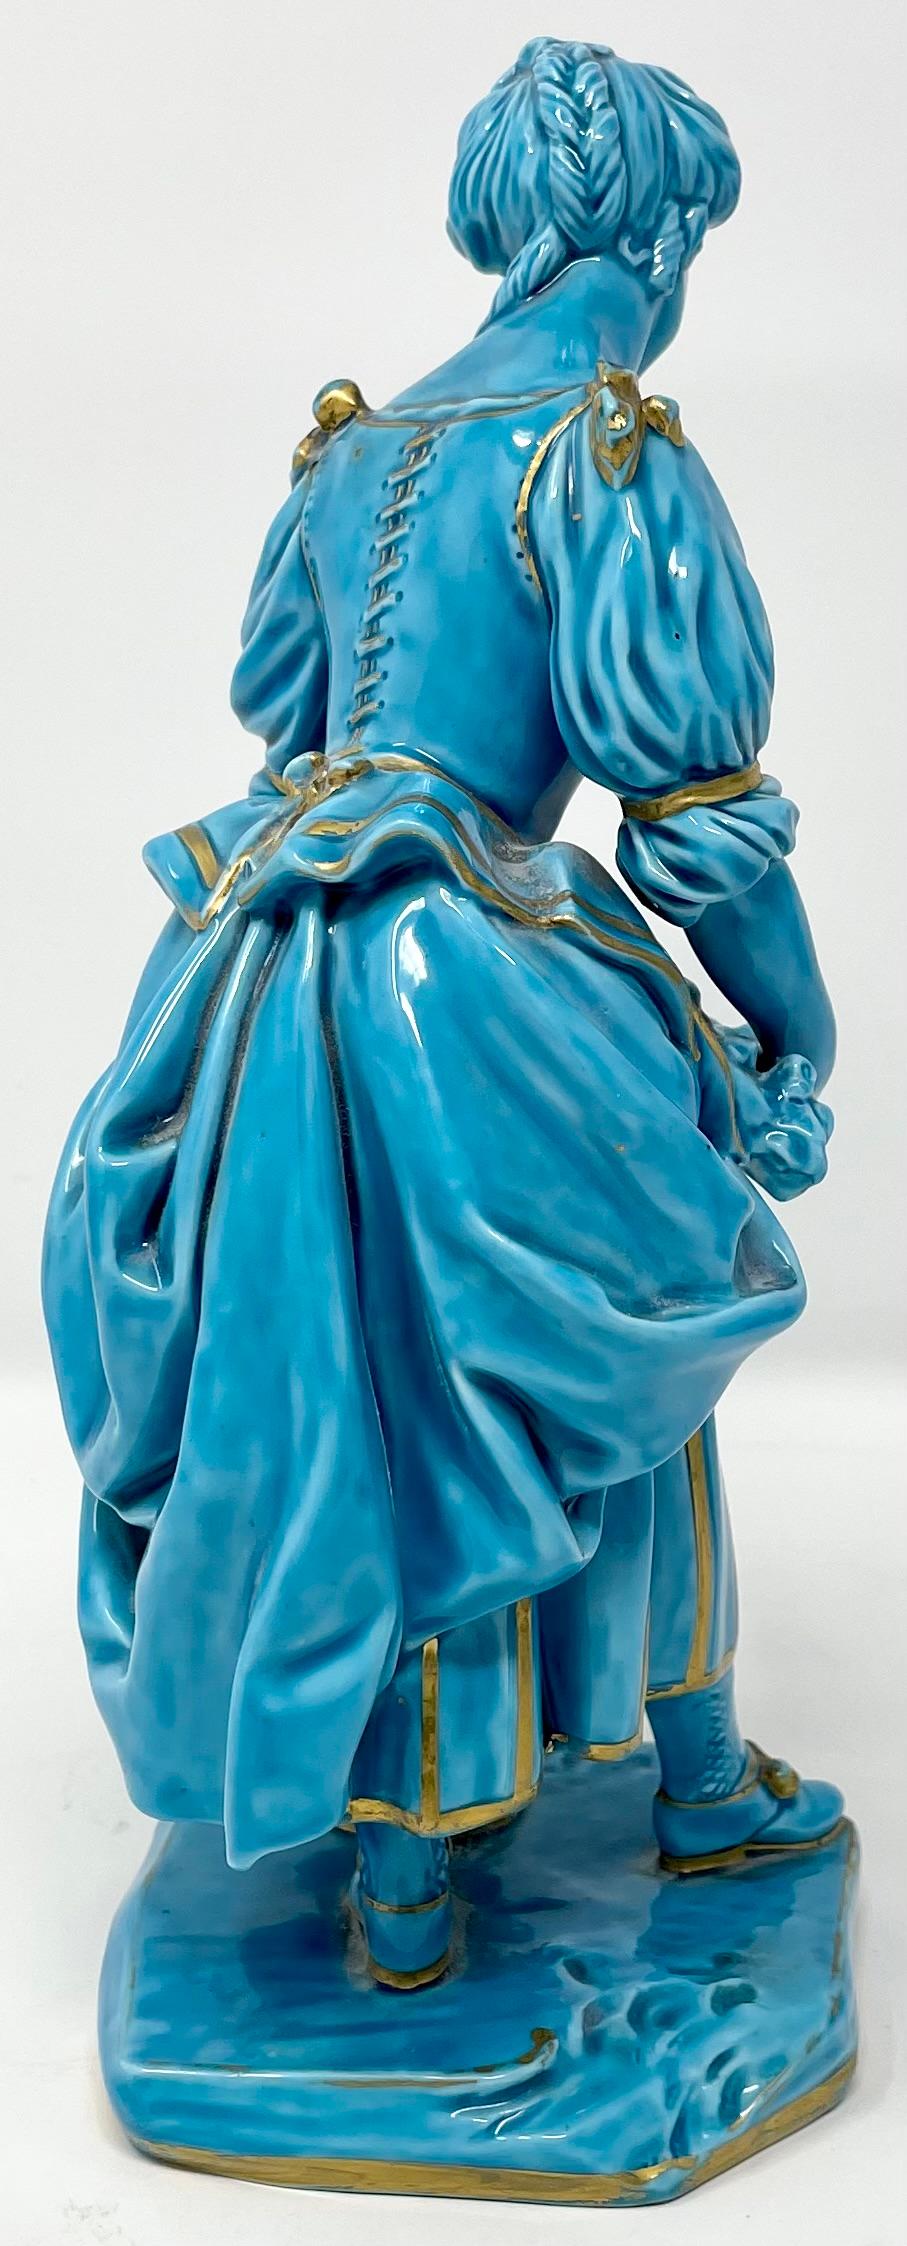 Set of 4 Antique French Porcelain Turquoise & Gold Table Figurines, Circa 1880. For Sale 2